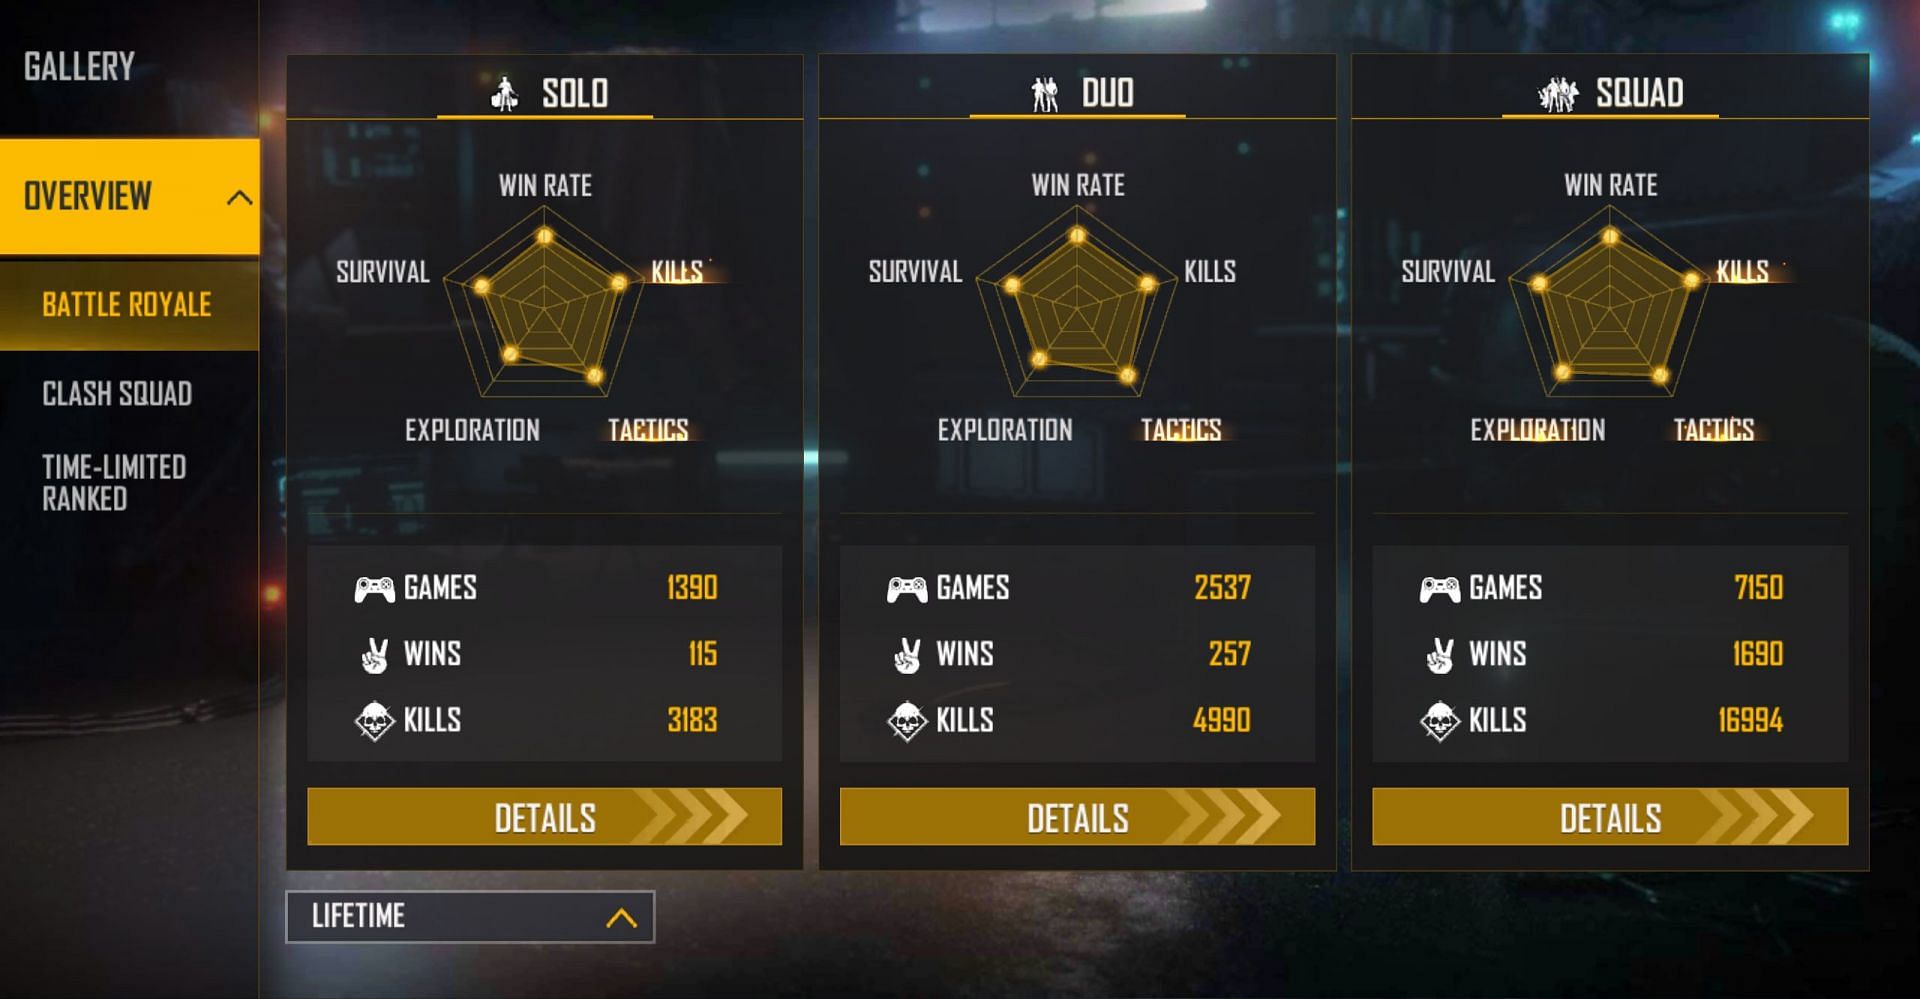 He has great lifetime stats in the battle royale title (Image via Garena)